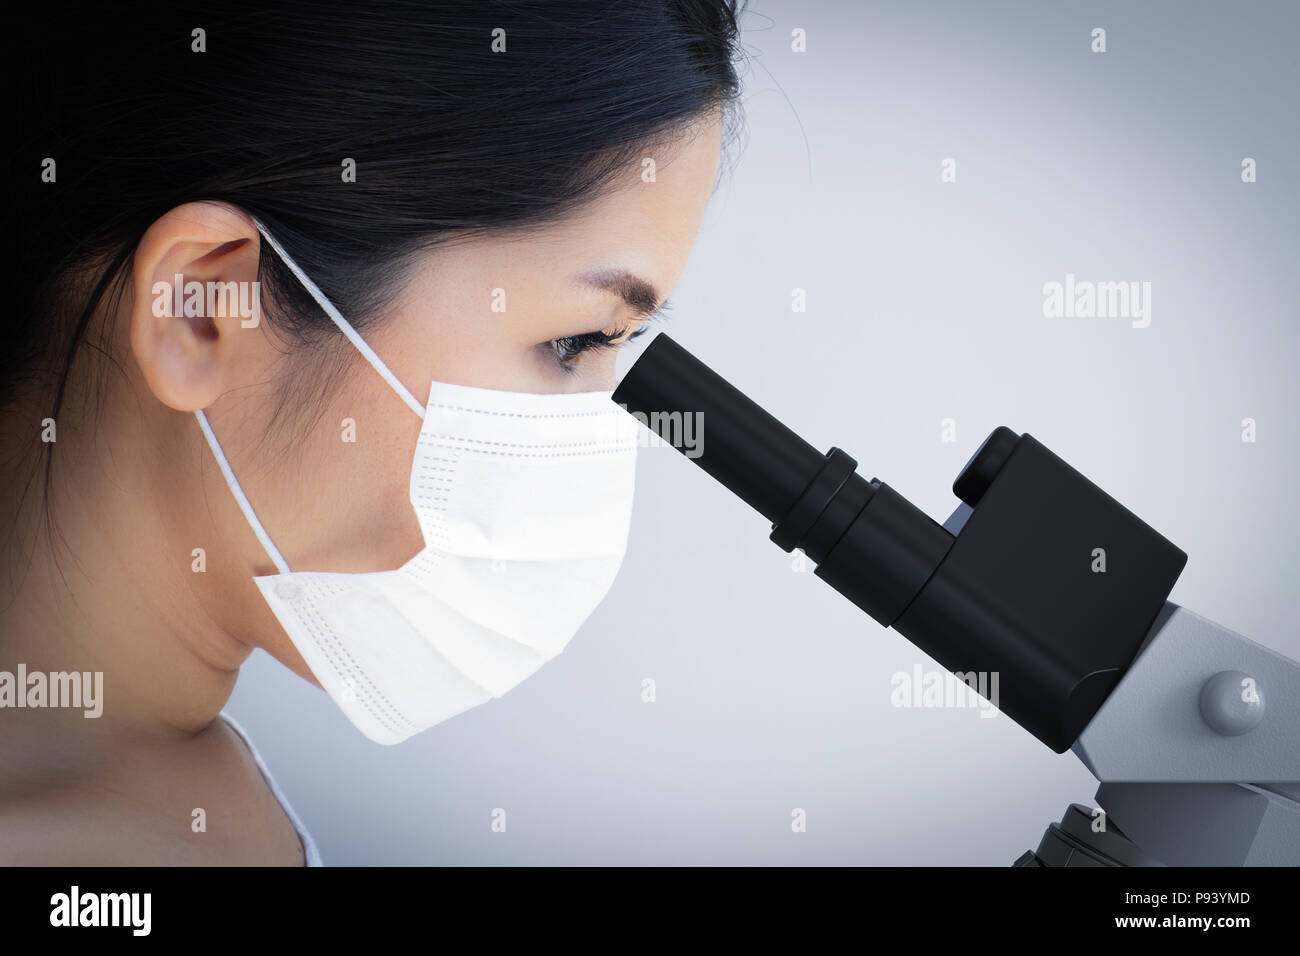 Asian scientist wearing face mask and looking at microscope Stock Photo